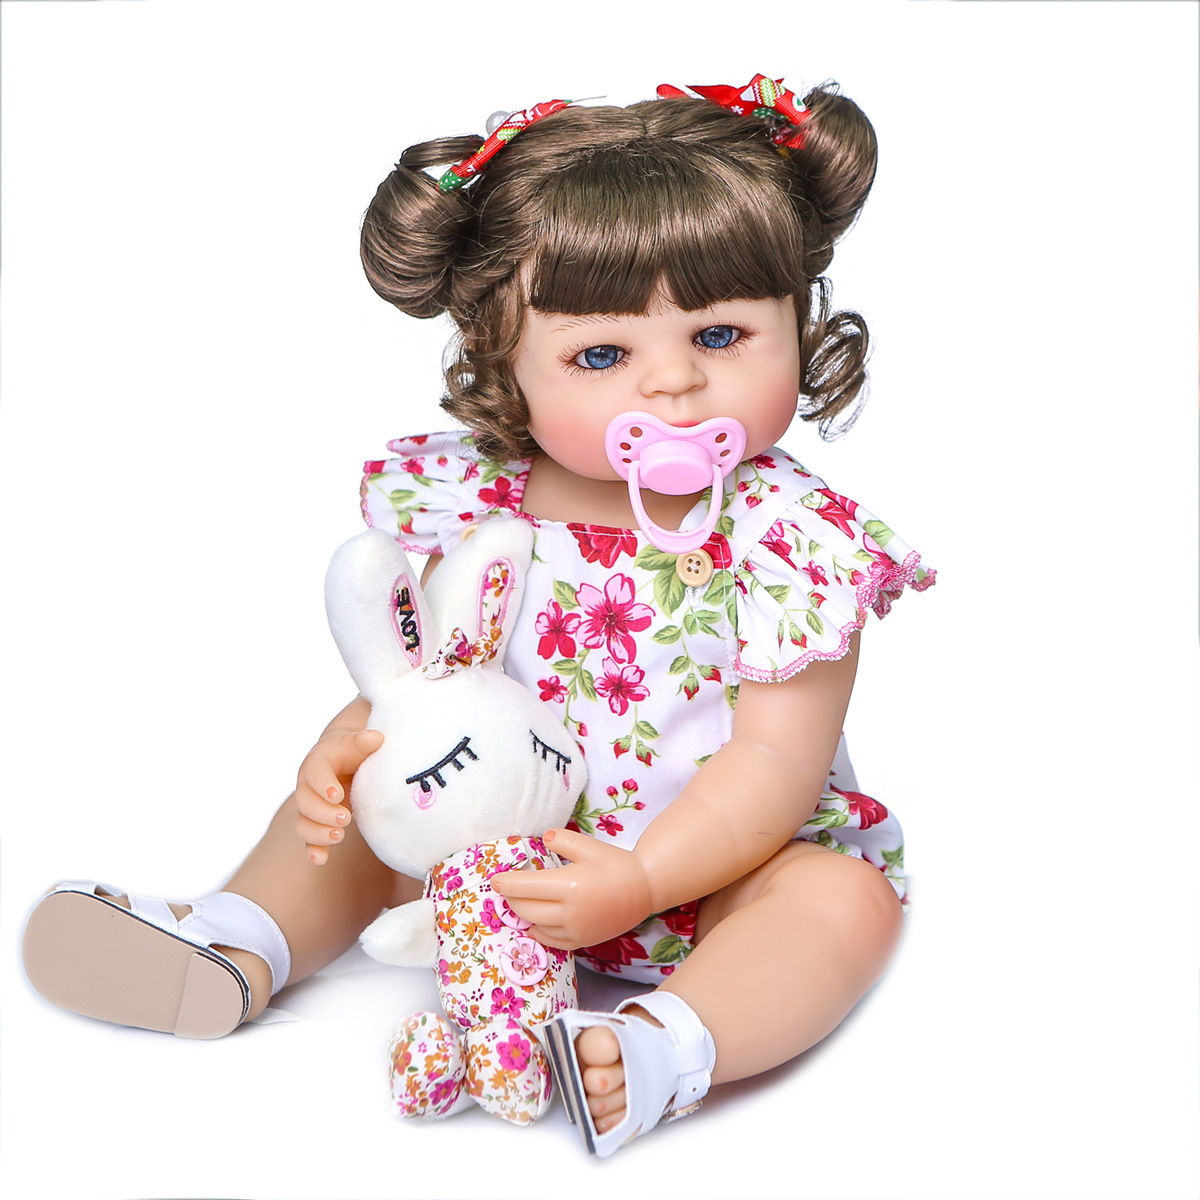 Event Plushies Waterproof 55cm Lifelike Baby Doll for Bath Time - Perfect Gift